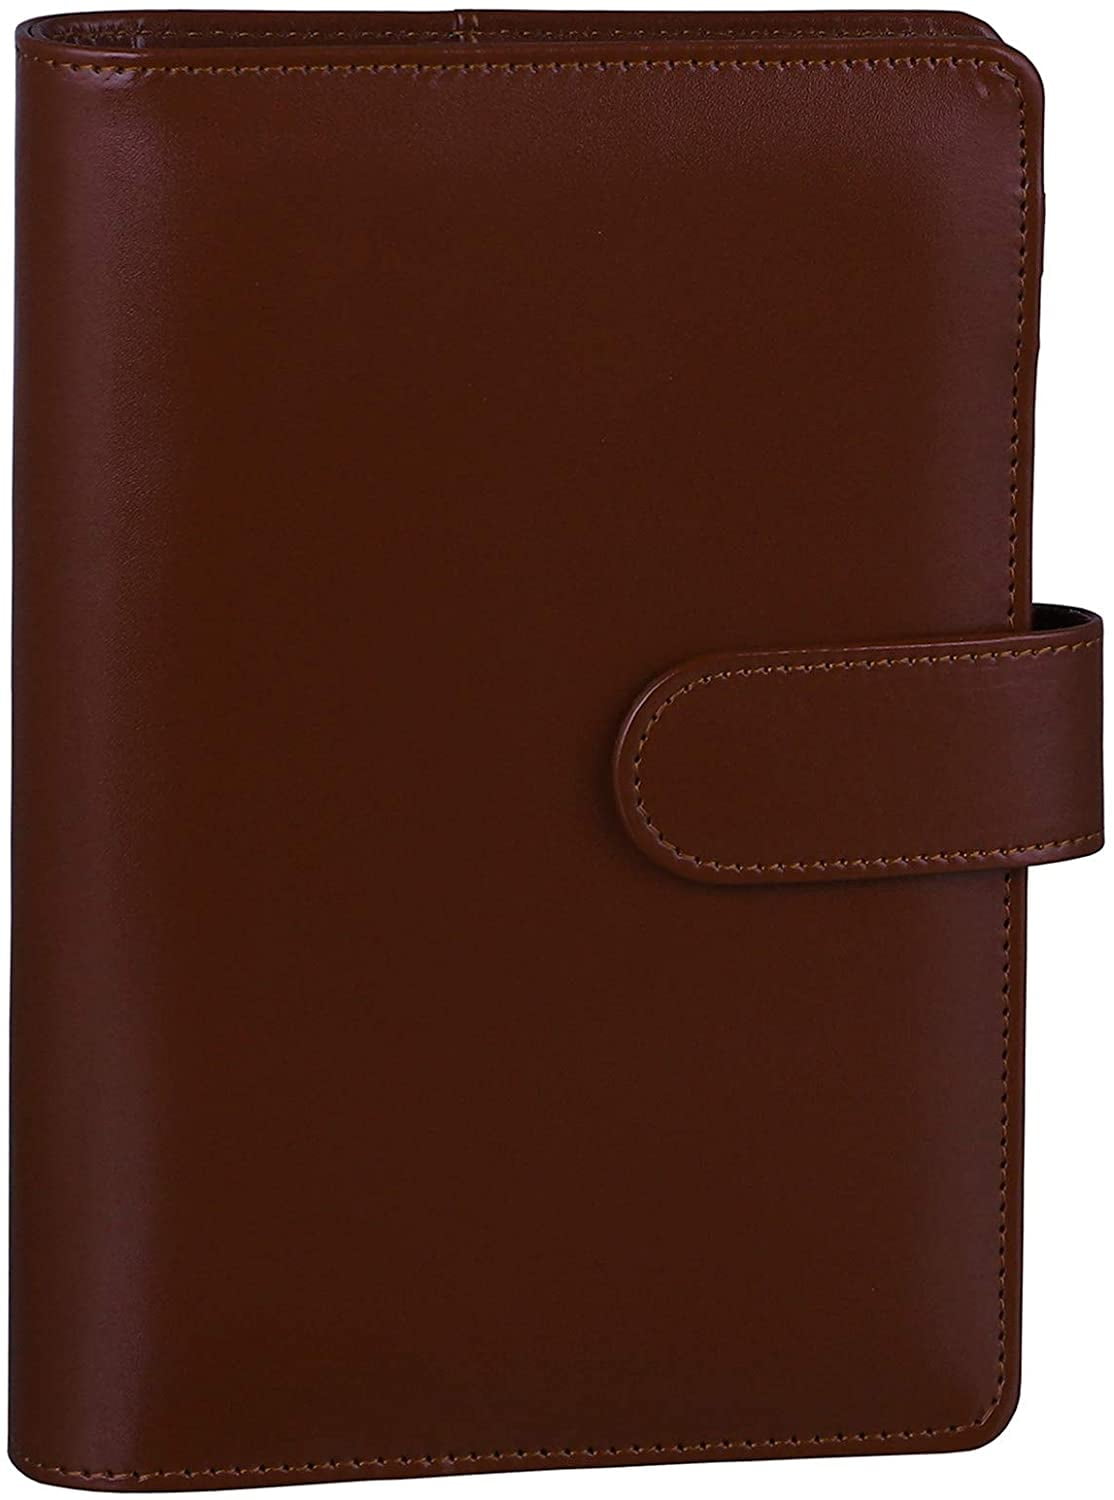 A5 Leather Notebook Personal A7 Genuine Leather Planner 6 ring binder Leather organizer Refillable Leather Planner Brown